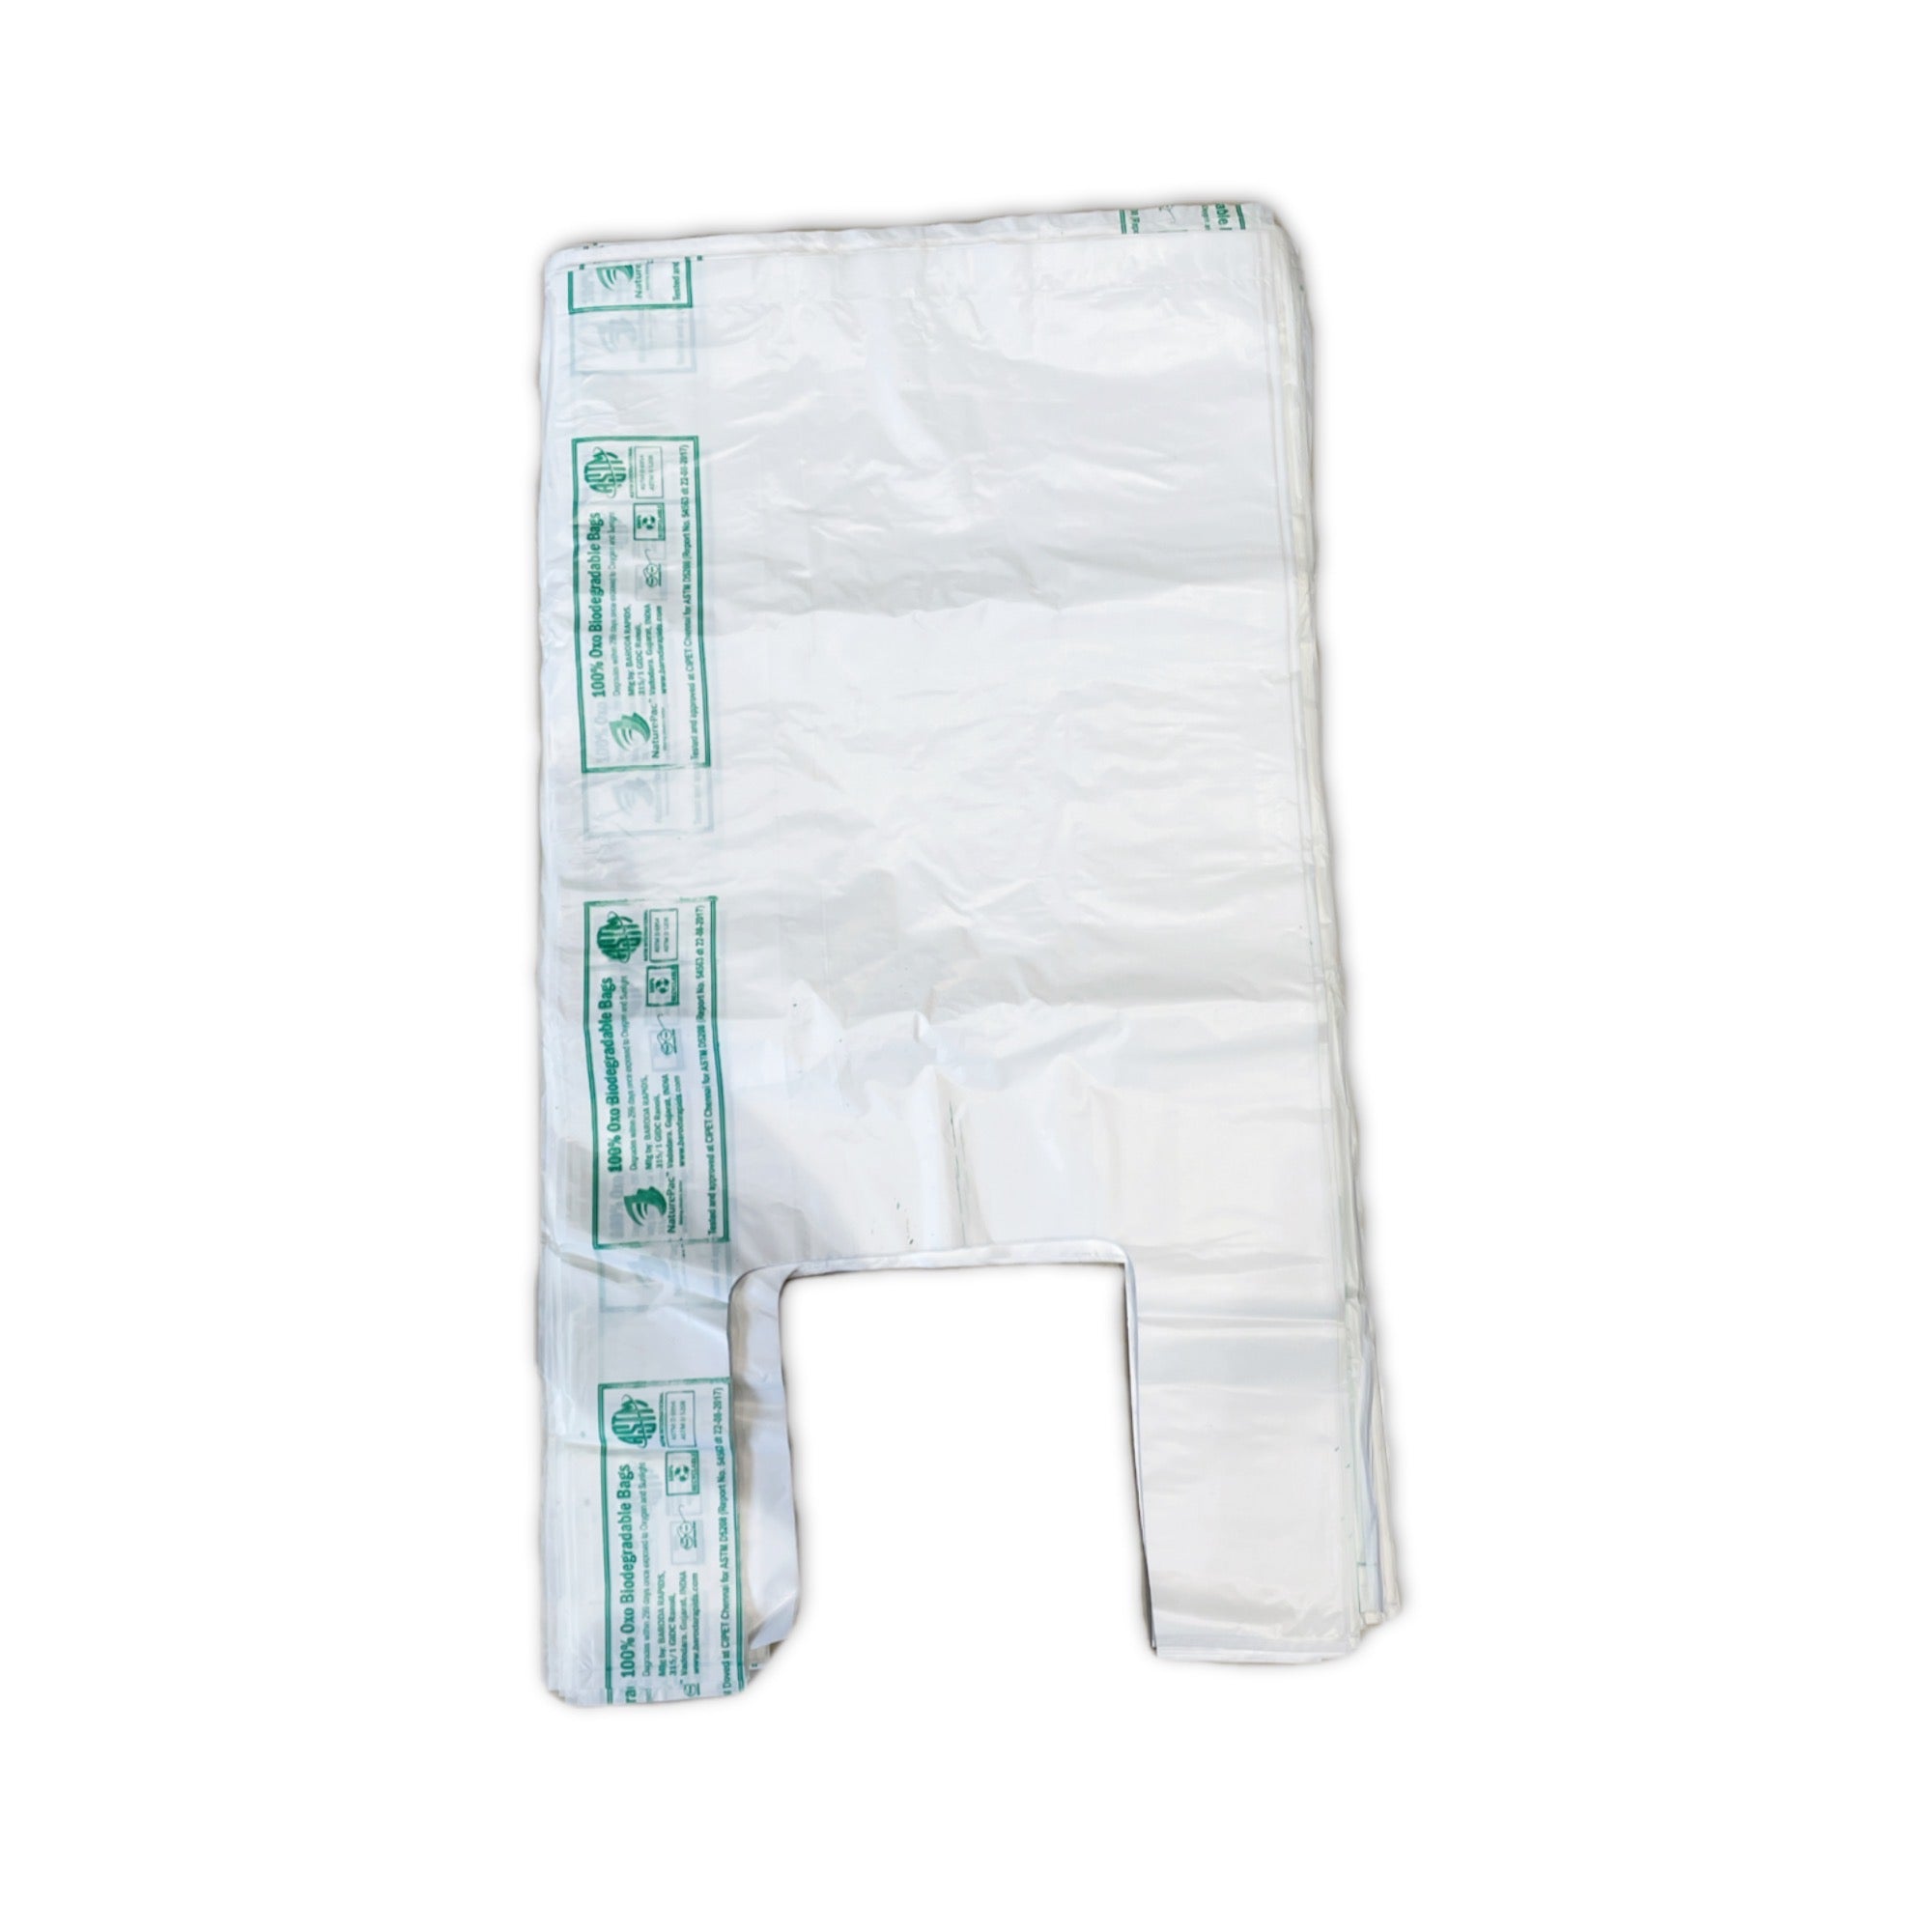 China 100% Biodegradable Bags Compostable Flat Bags on Roll, Vegetable  Bags, Fruit Bags, Storage Bags, Manufacturer/Supplier/Wholesale/Factory -  China Produce/Bags T-Shirt Bags, Vest/Flat Bags | Made-in-China.com